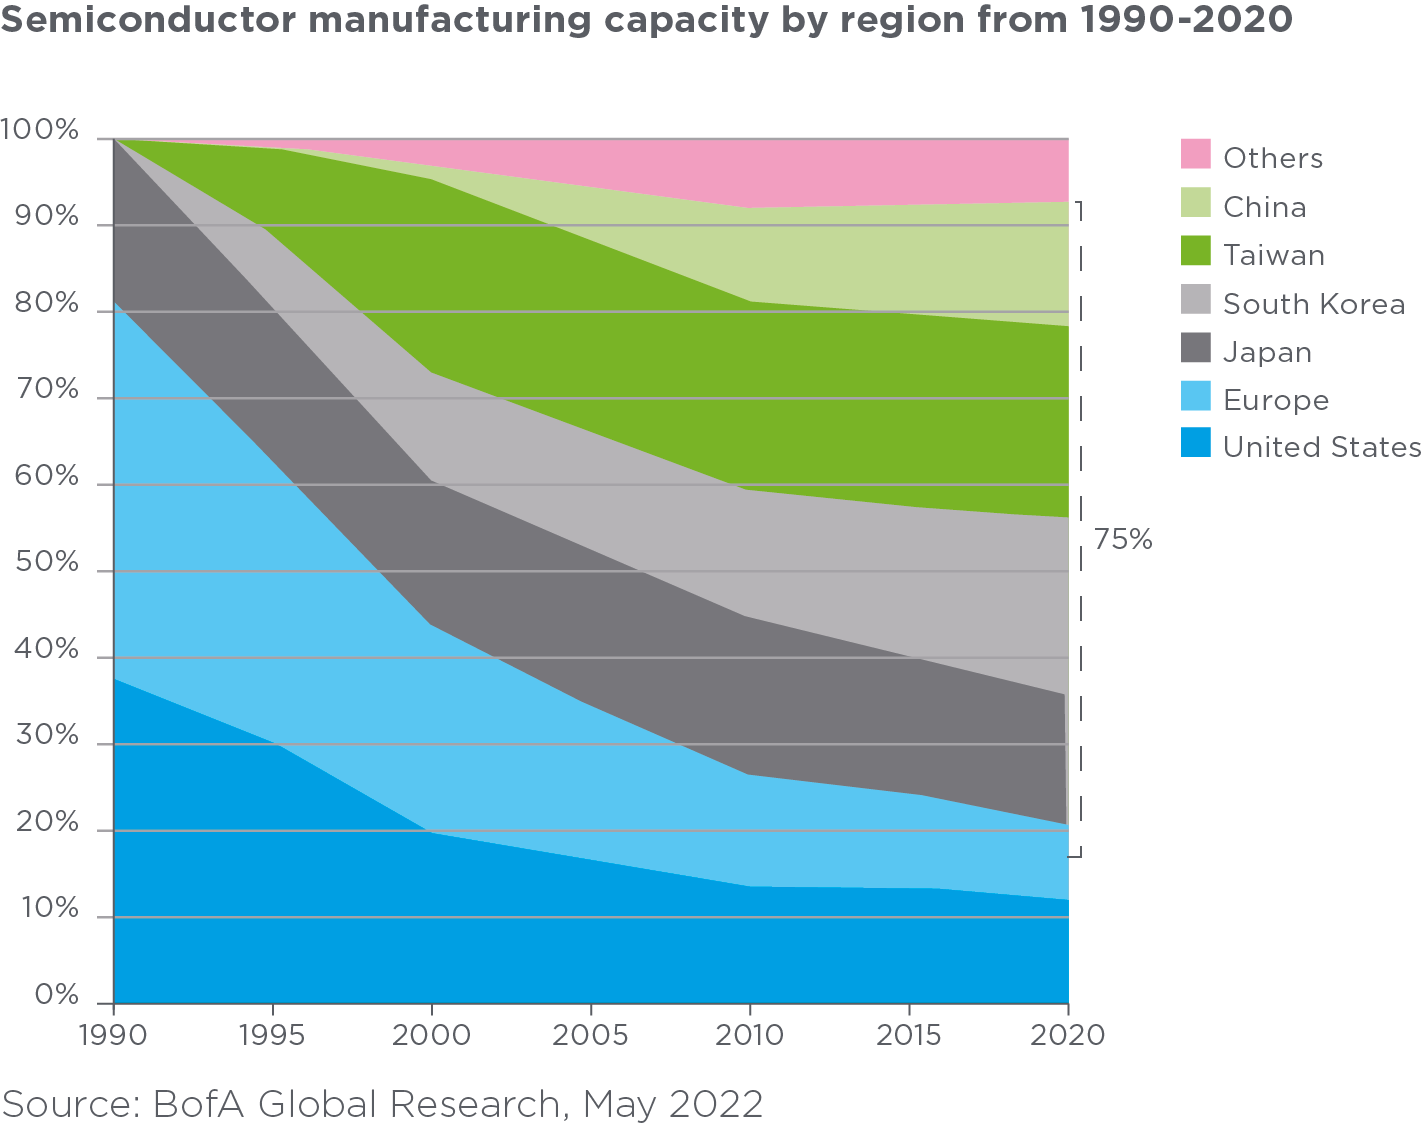 Semiconductor manufacturing capacity by region from 1990-2020